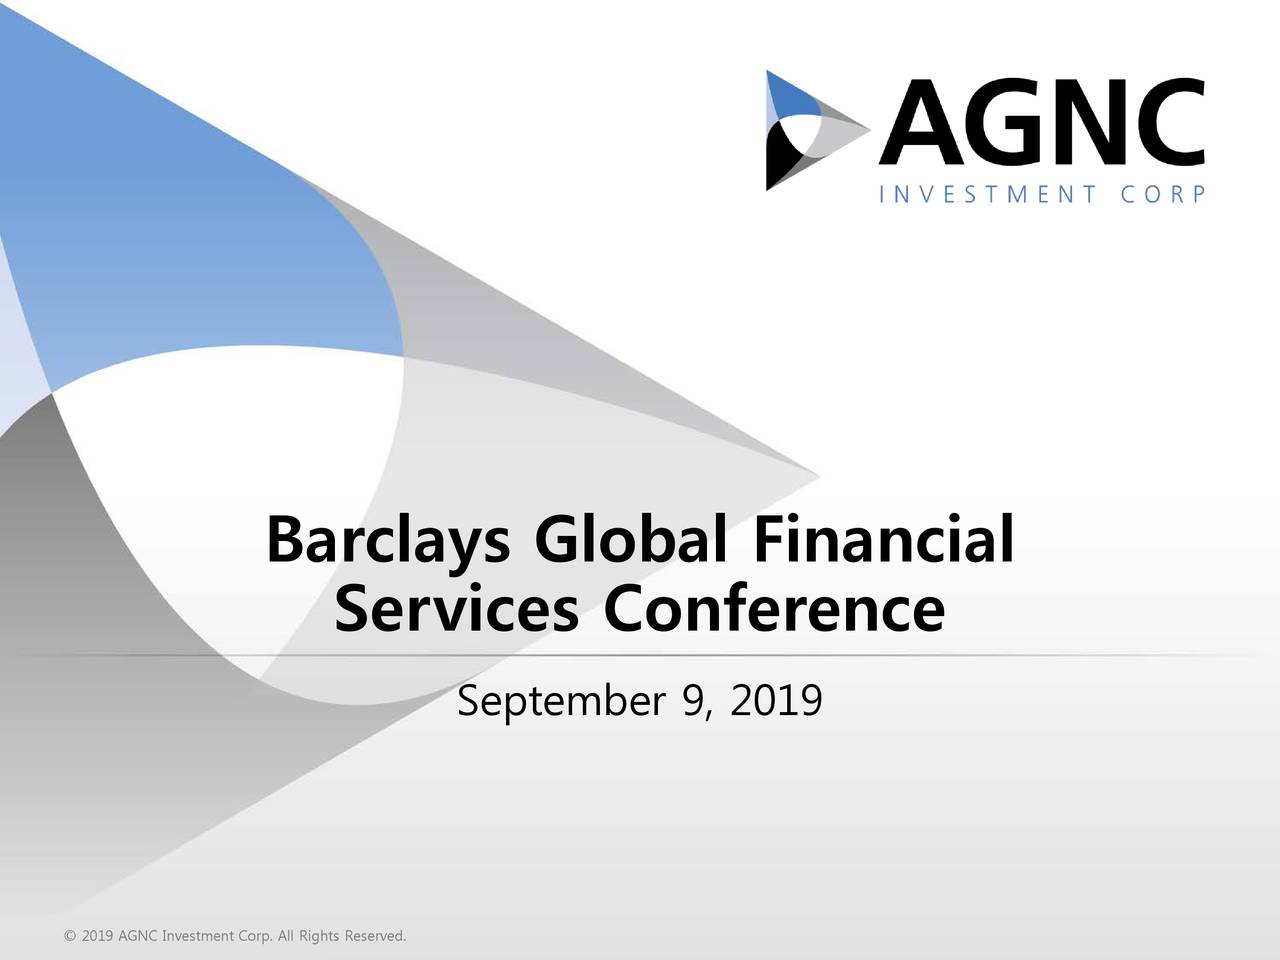 AGNC Investment (AGNC) Presents At Barclays Global Financial Services